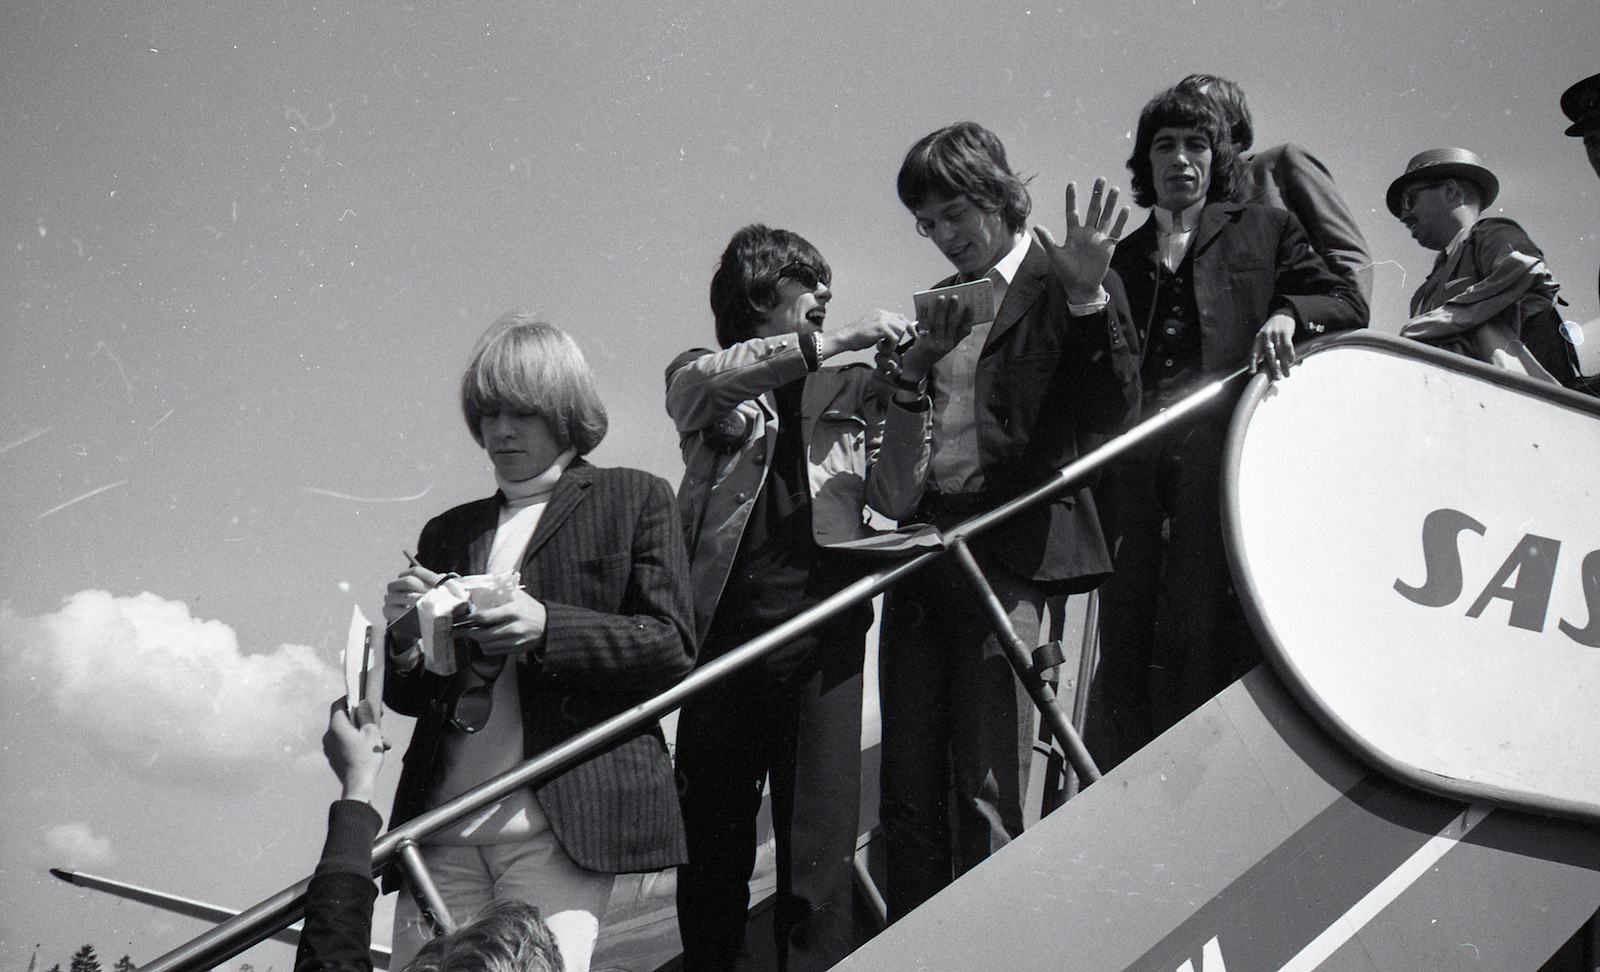 British rock group the Rolling Stones arrive in Norway, 1965.